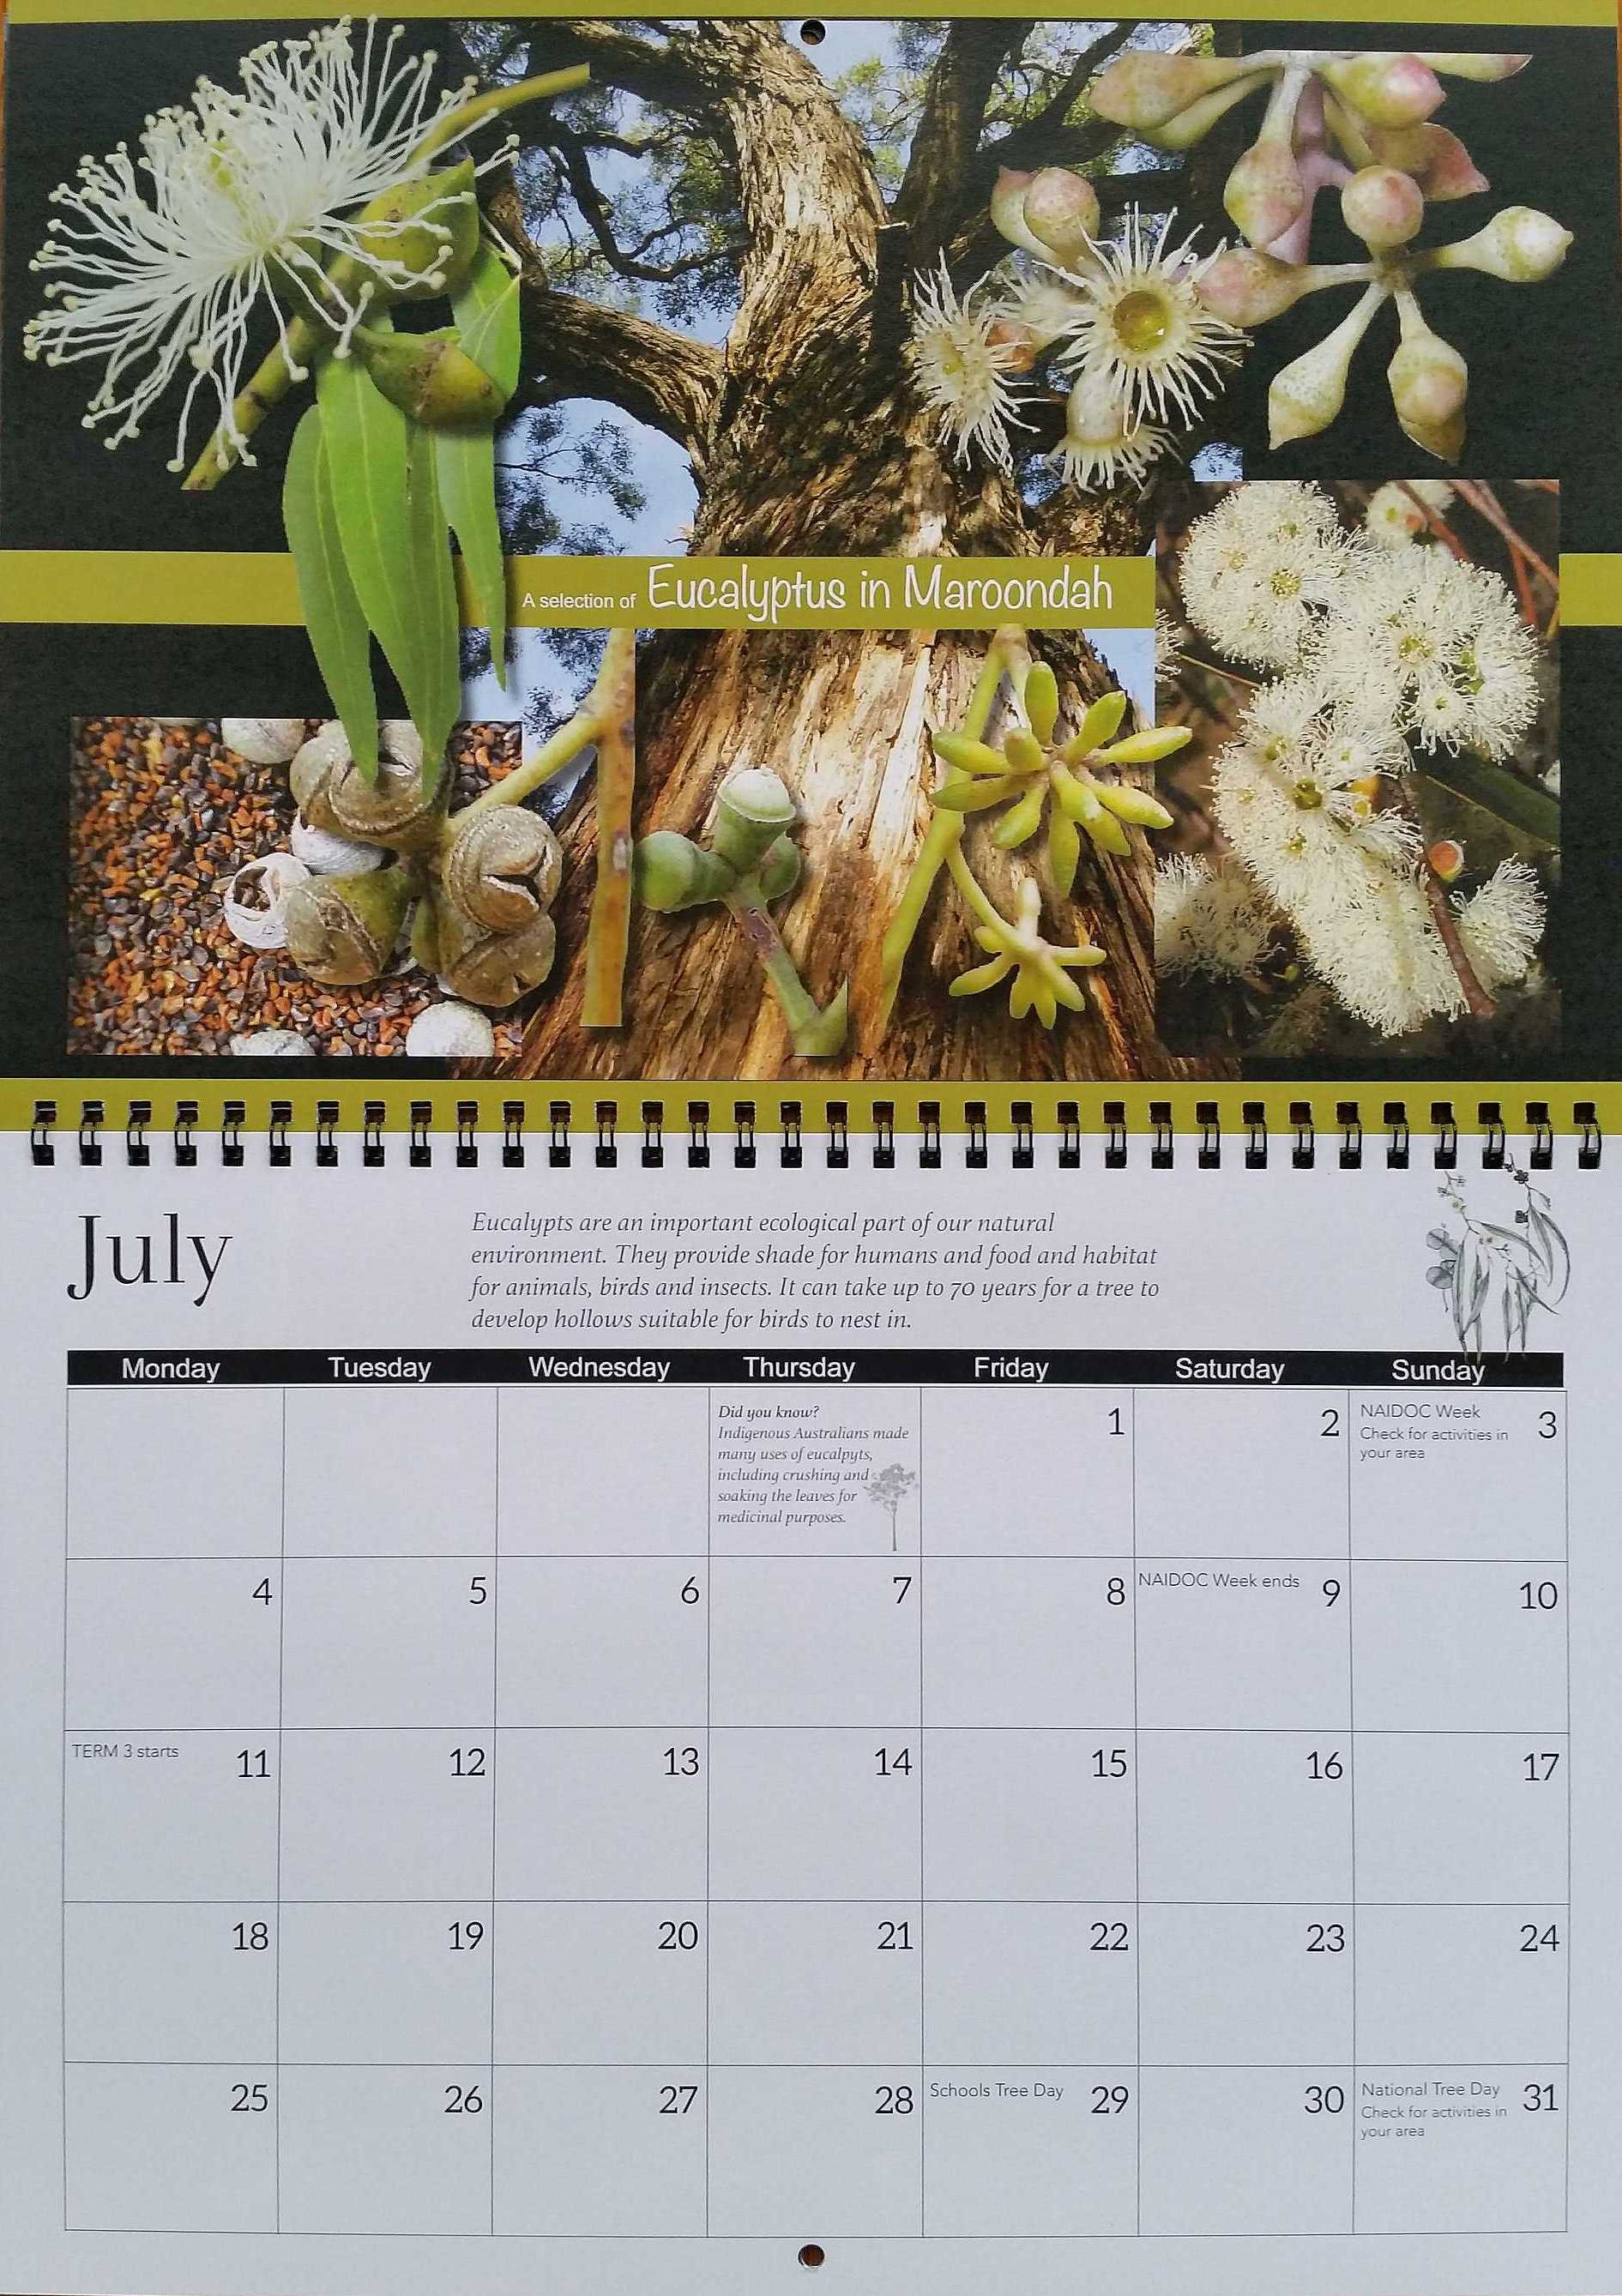 Sample page from Calendar 2022